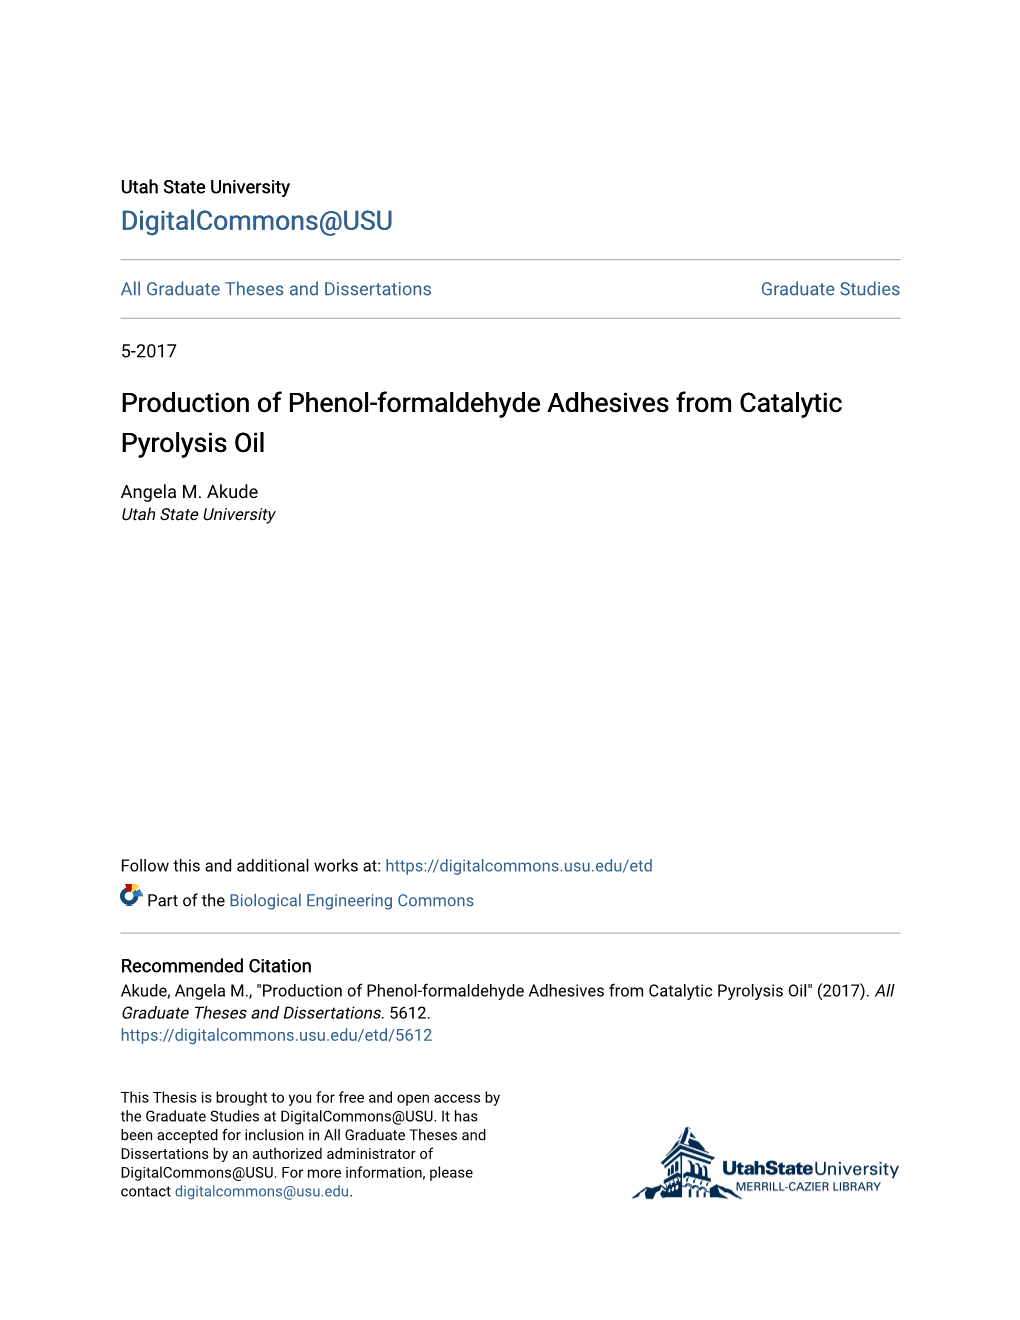 Production of Phenol-Formaldehyde Adhesives from Catalytic Pyrolysis Oil